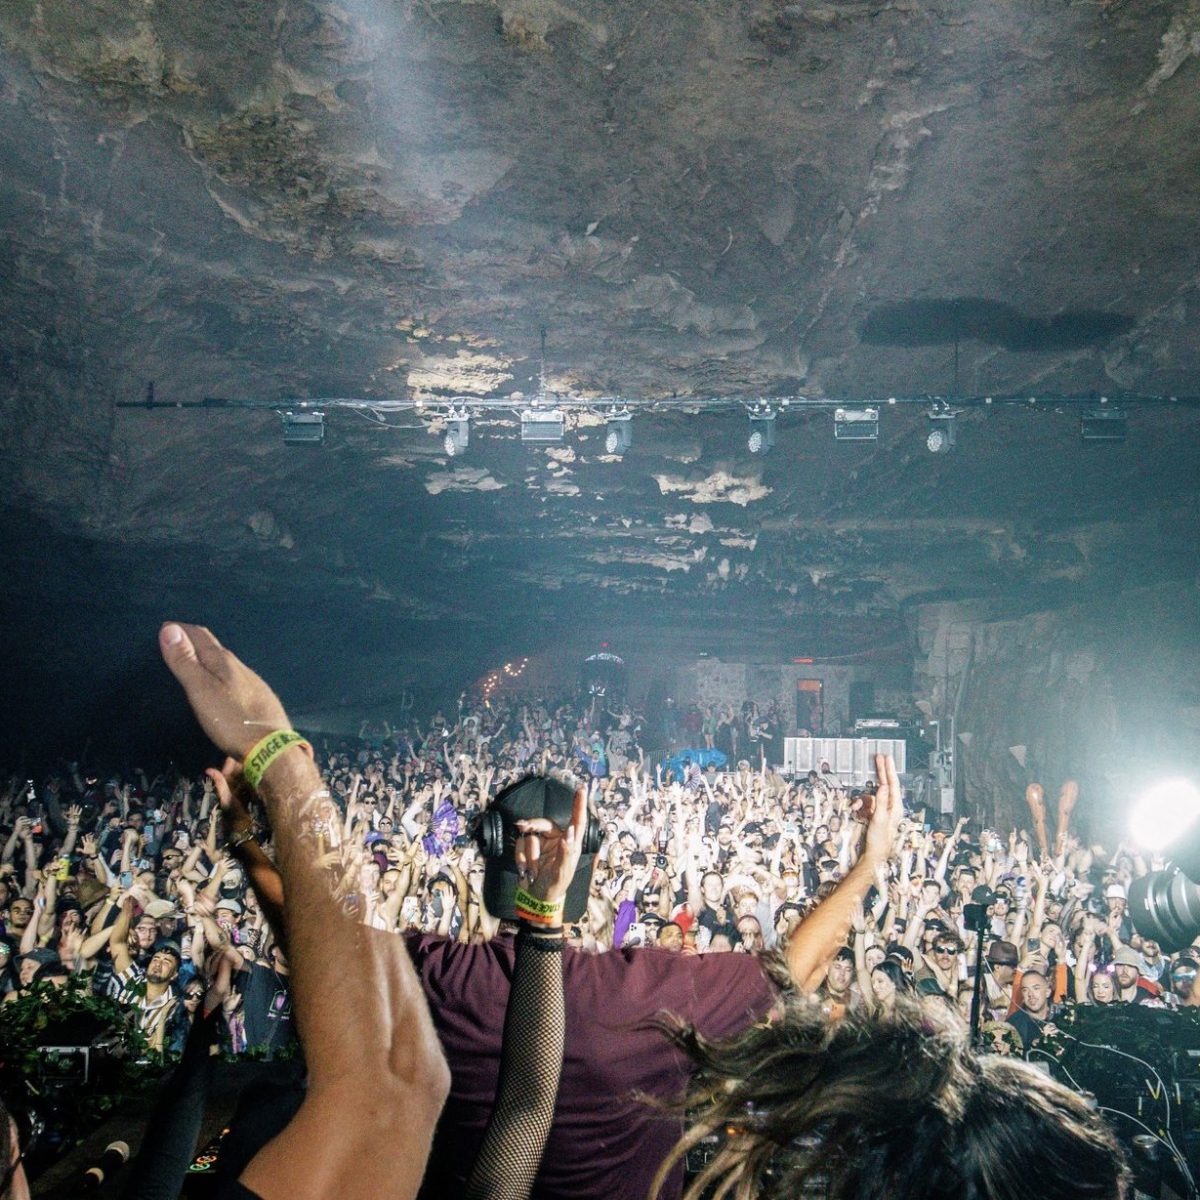 Experts Only Caverns Weekender Announces Lineup for Cave After Parties